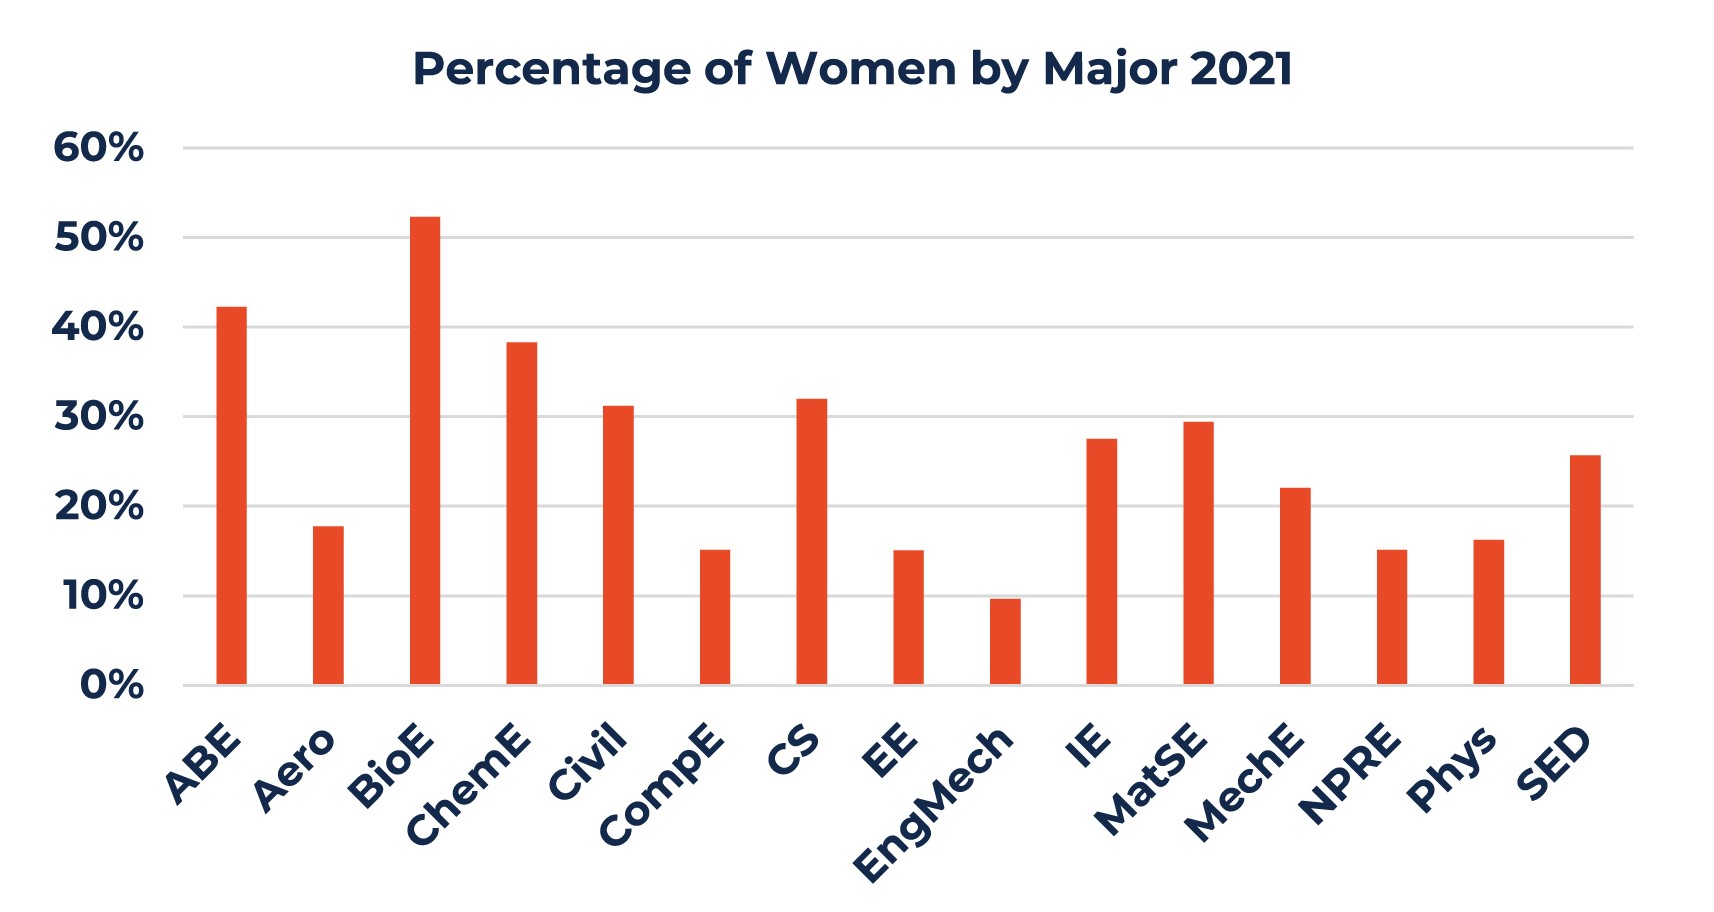 Graph depicting the percentage of women by major in 2021.